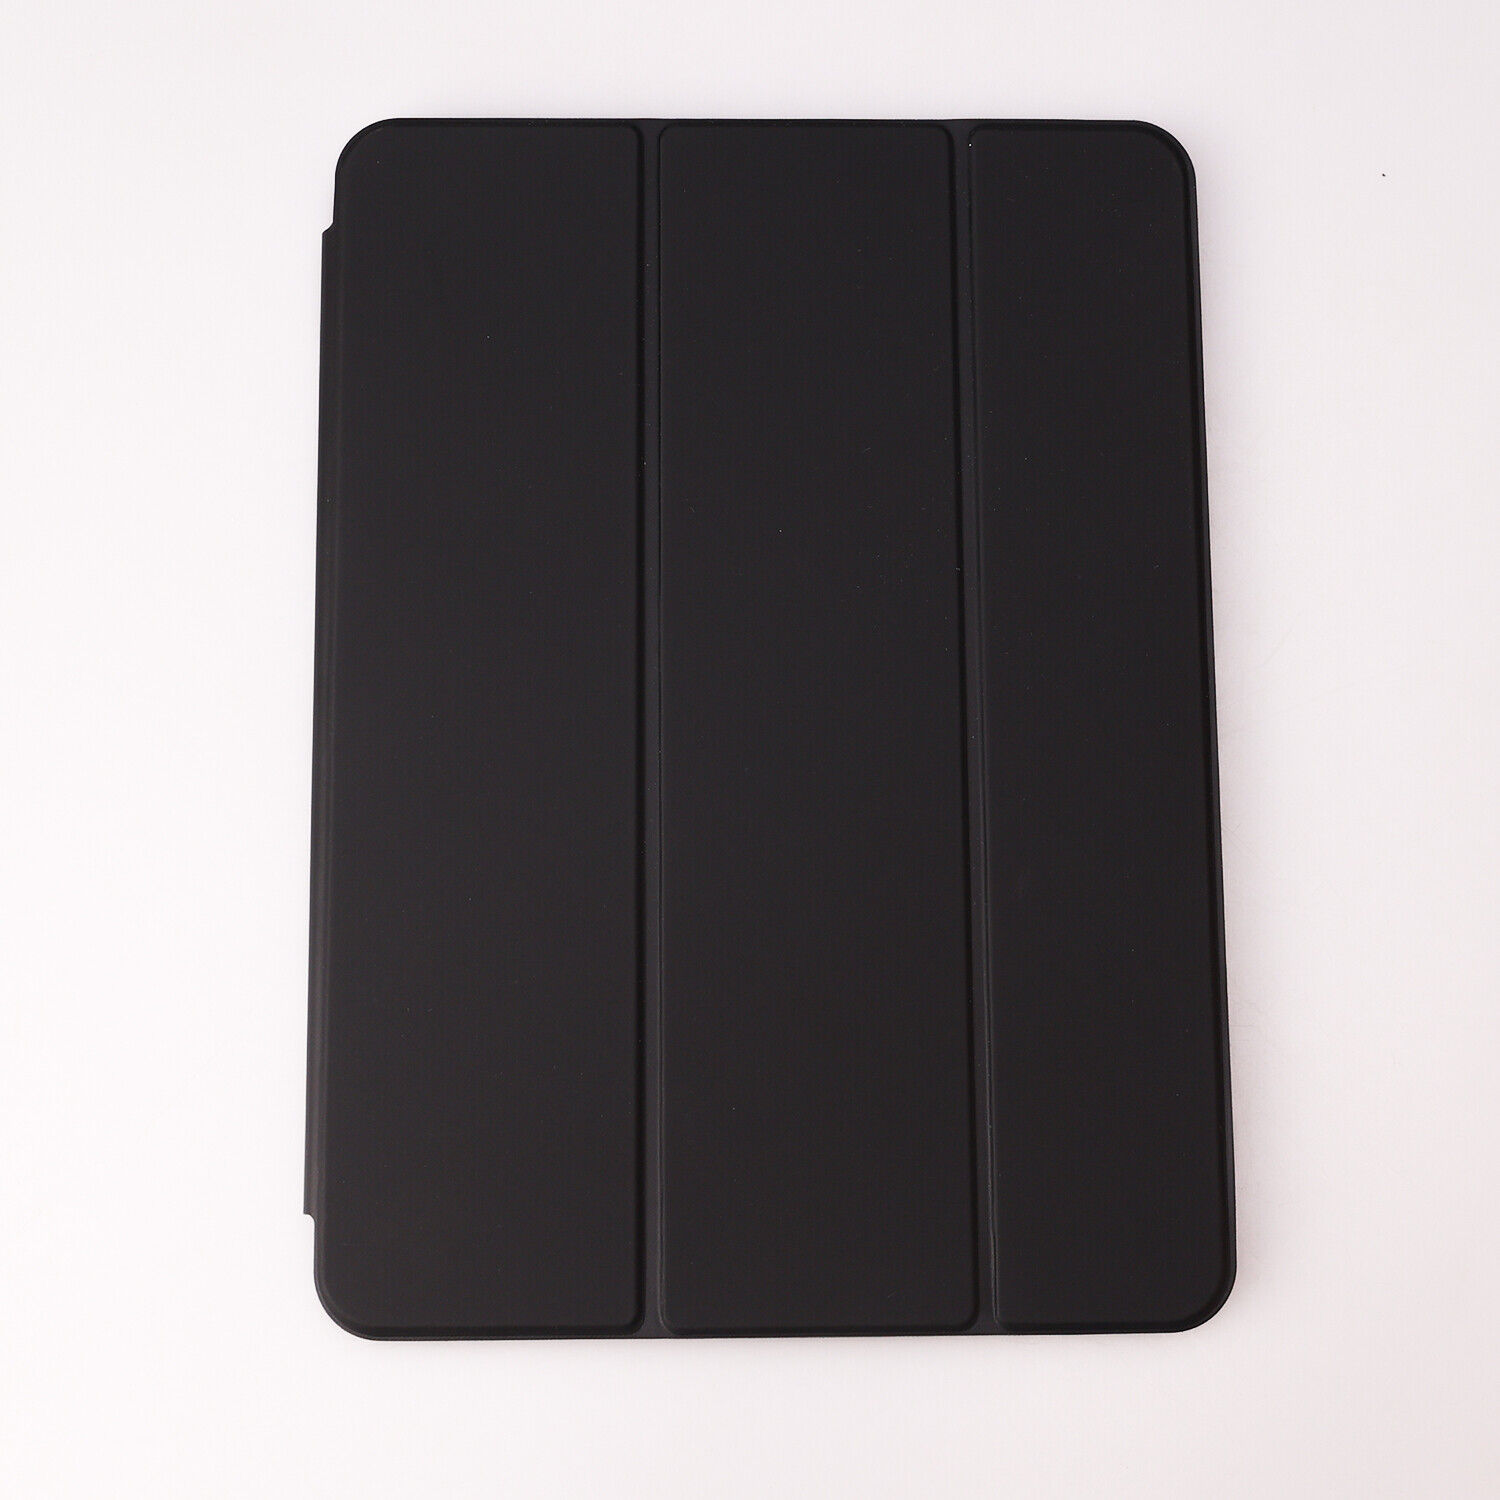 OEM Authentic Apple Smart Cover Magnetic iPad Case For iPad Air5/Air4 10.9 inch